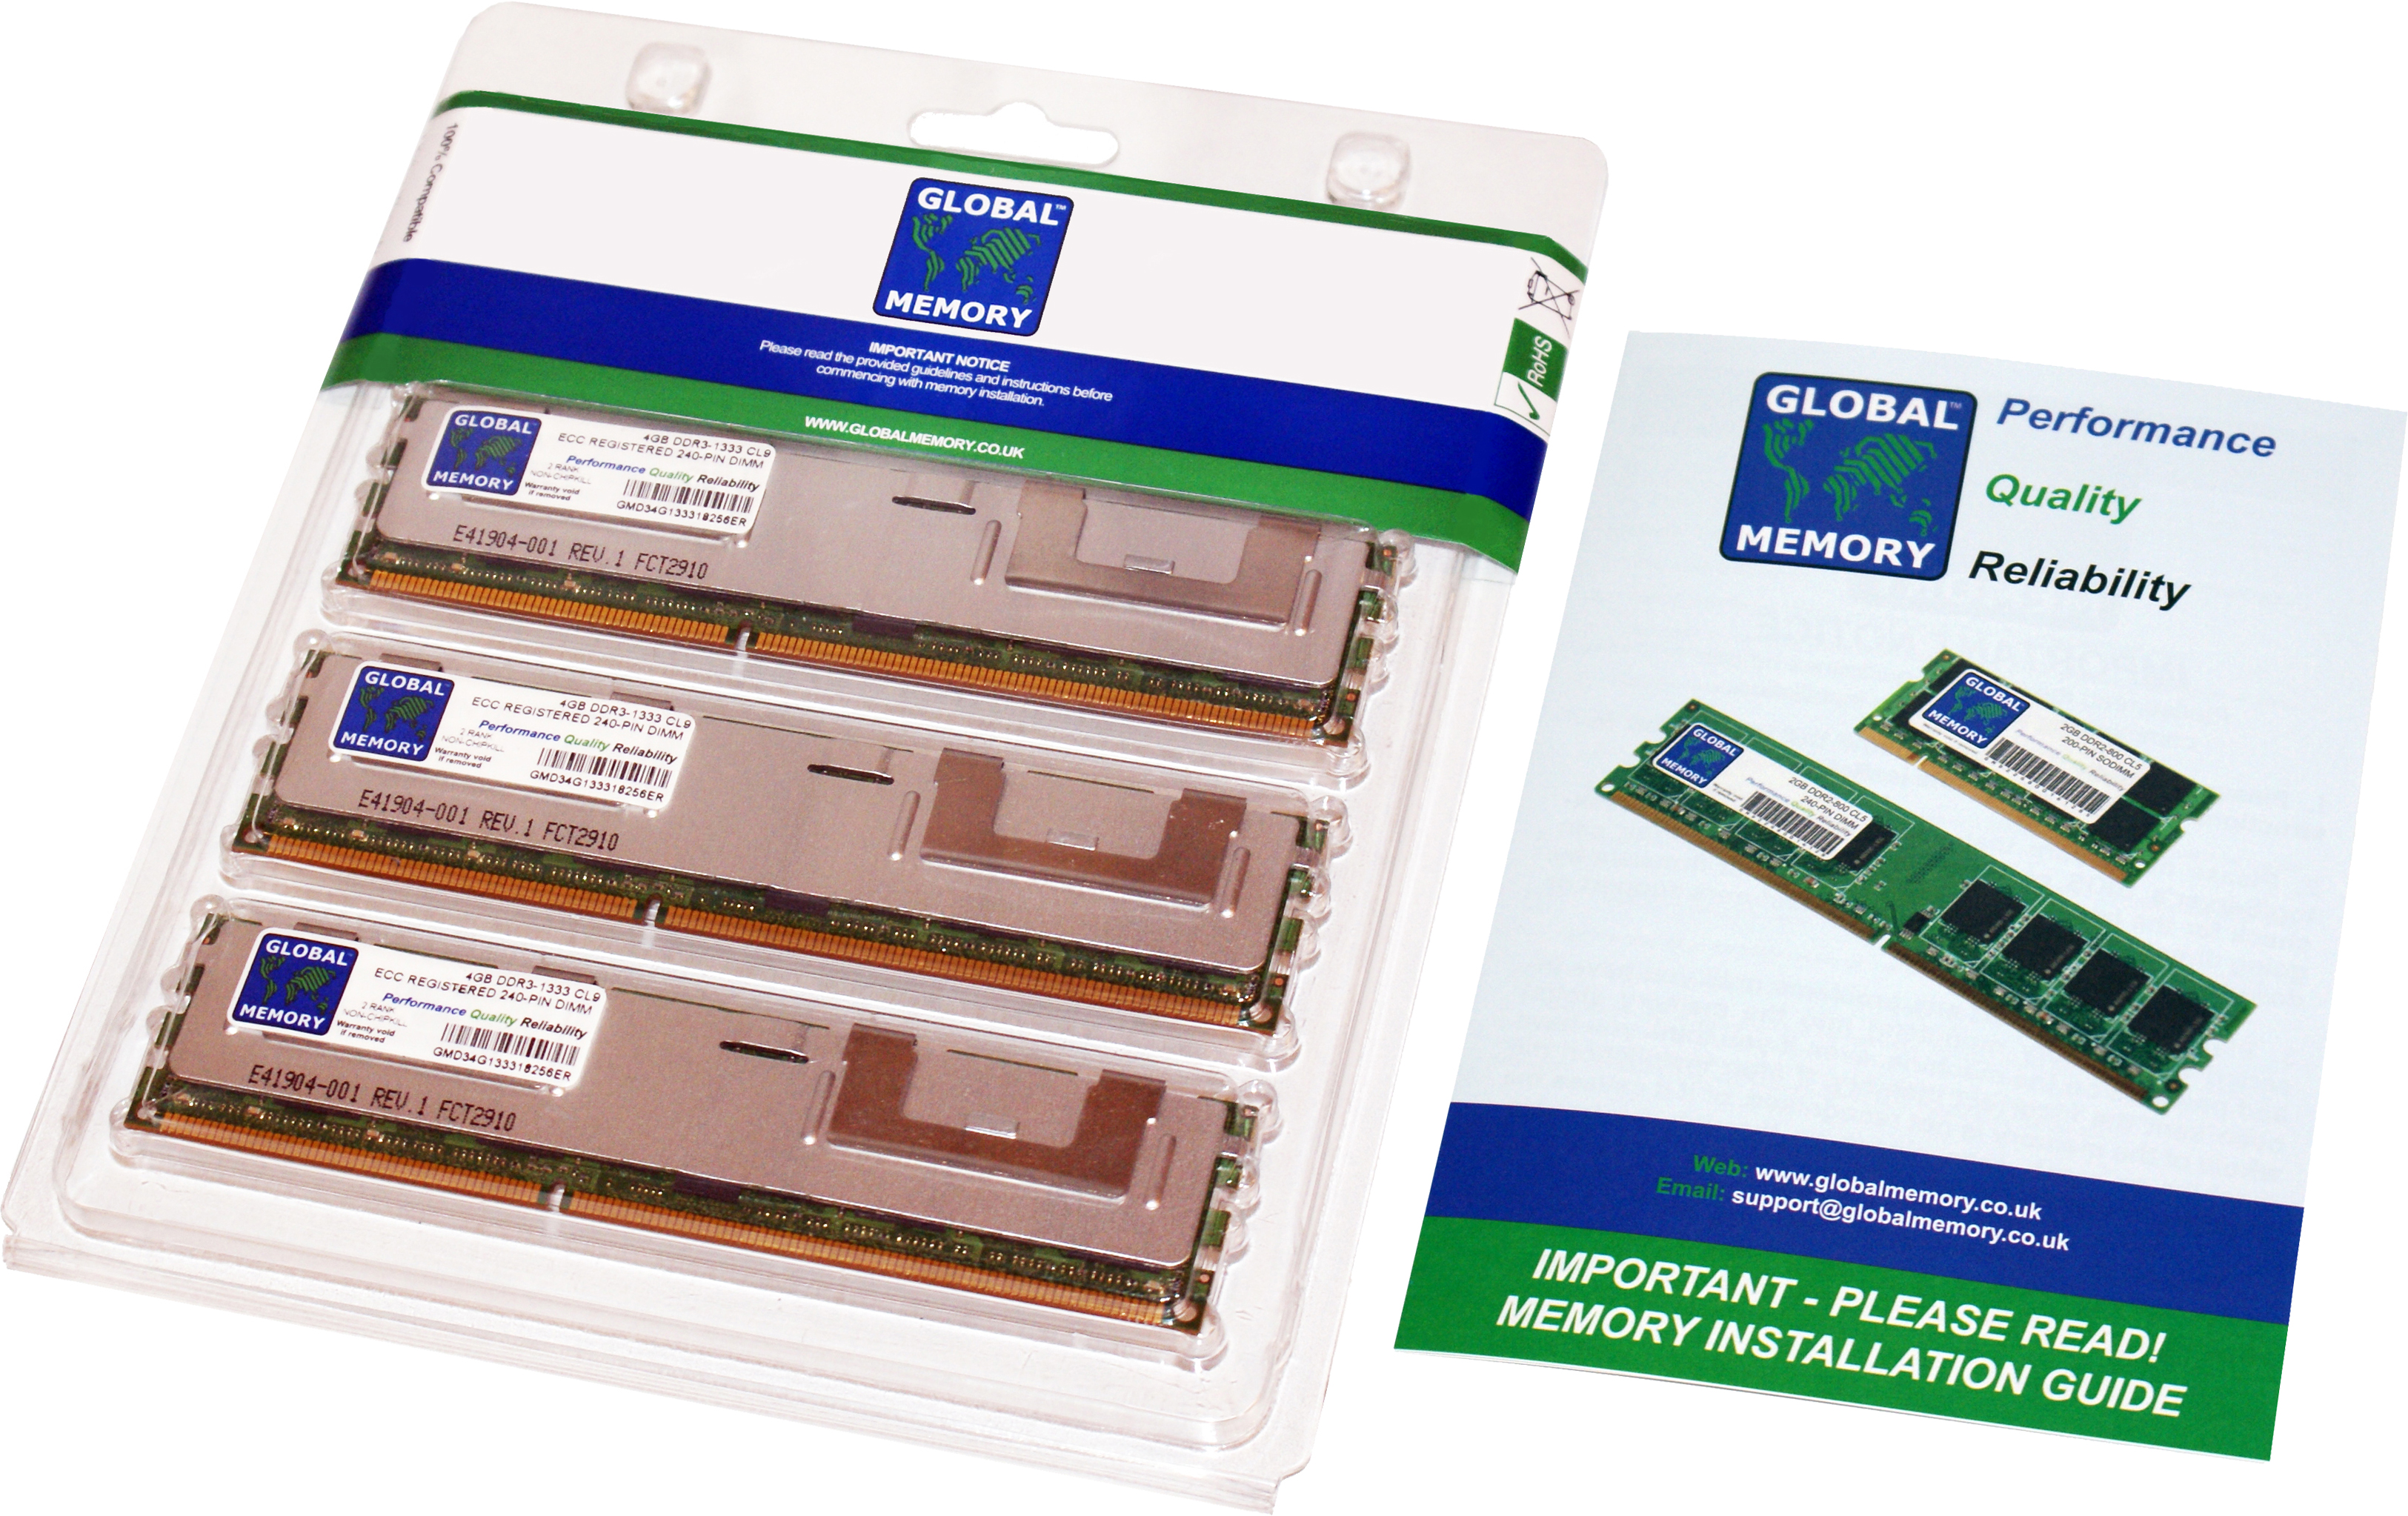 48GB (3 x 16GB) DDR3 1066MHz PC3-8500 240-PIN ECC REGISTERED DIMM (RDIMM) MEMORY RAM KIT FOR SERVERS/WORKSTATIONS/MOTHERBOARDS (12 RANK KIT NON-CHIPKILL)